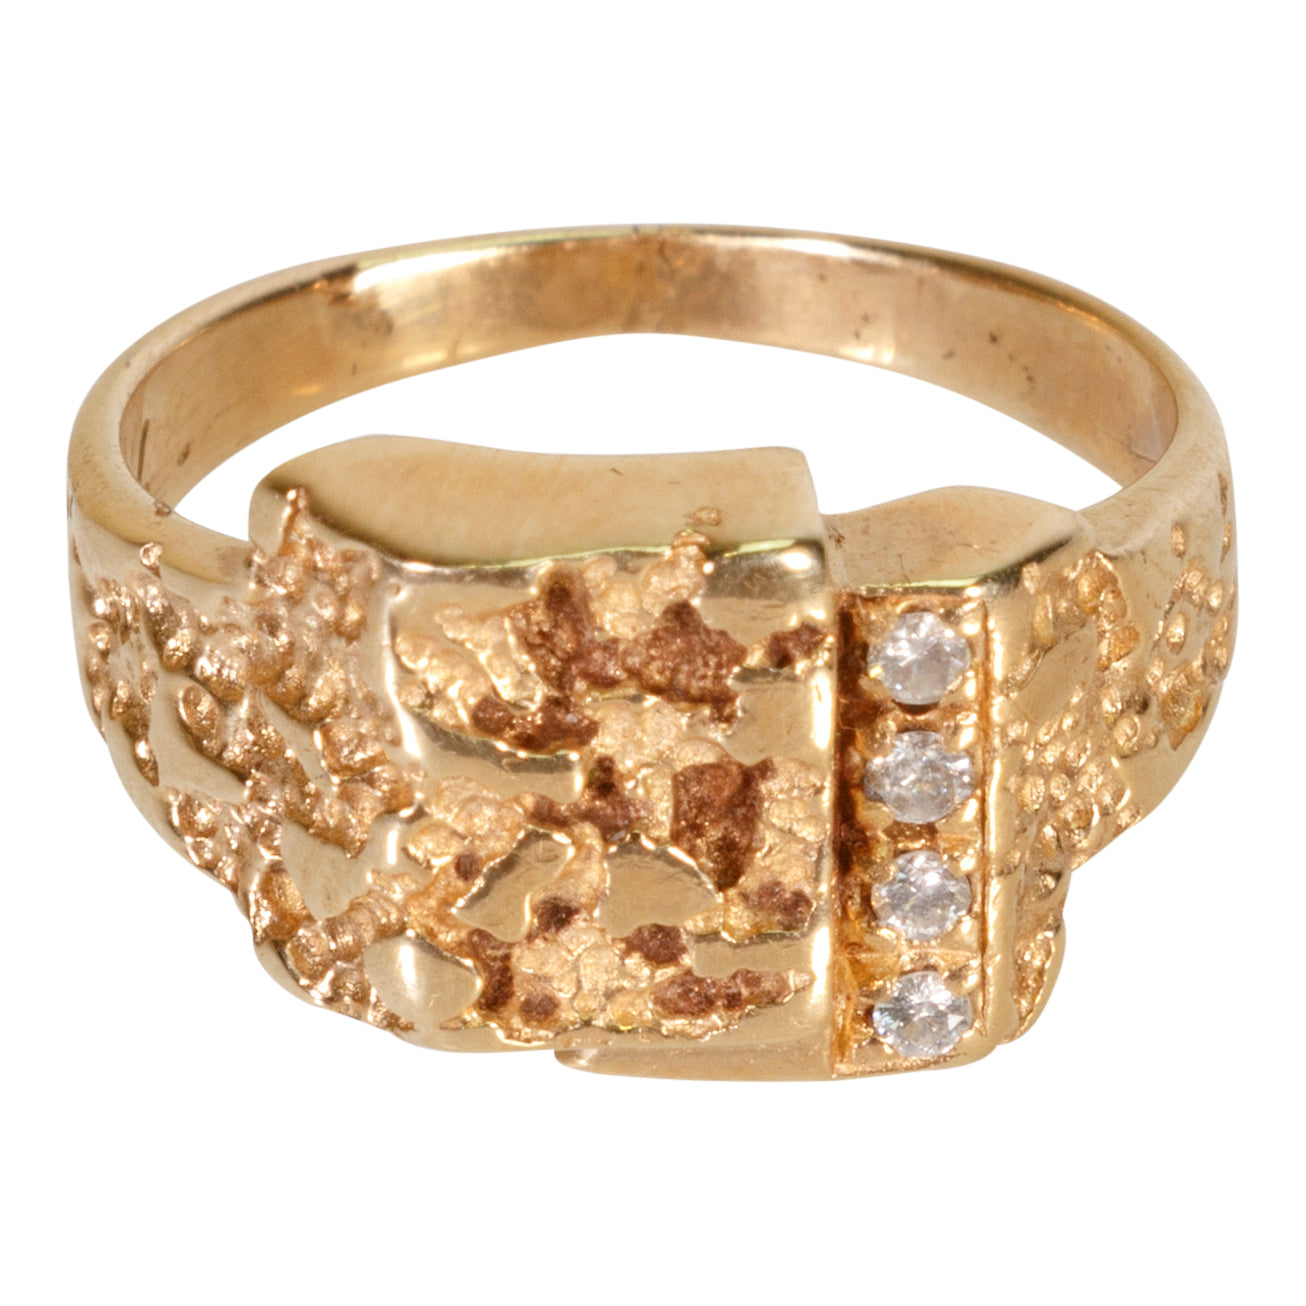 Gold Nugget and Diamond Ring, Jewelry, Ring, Estate